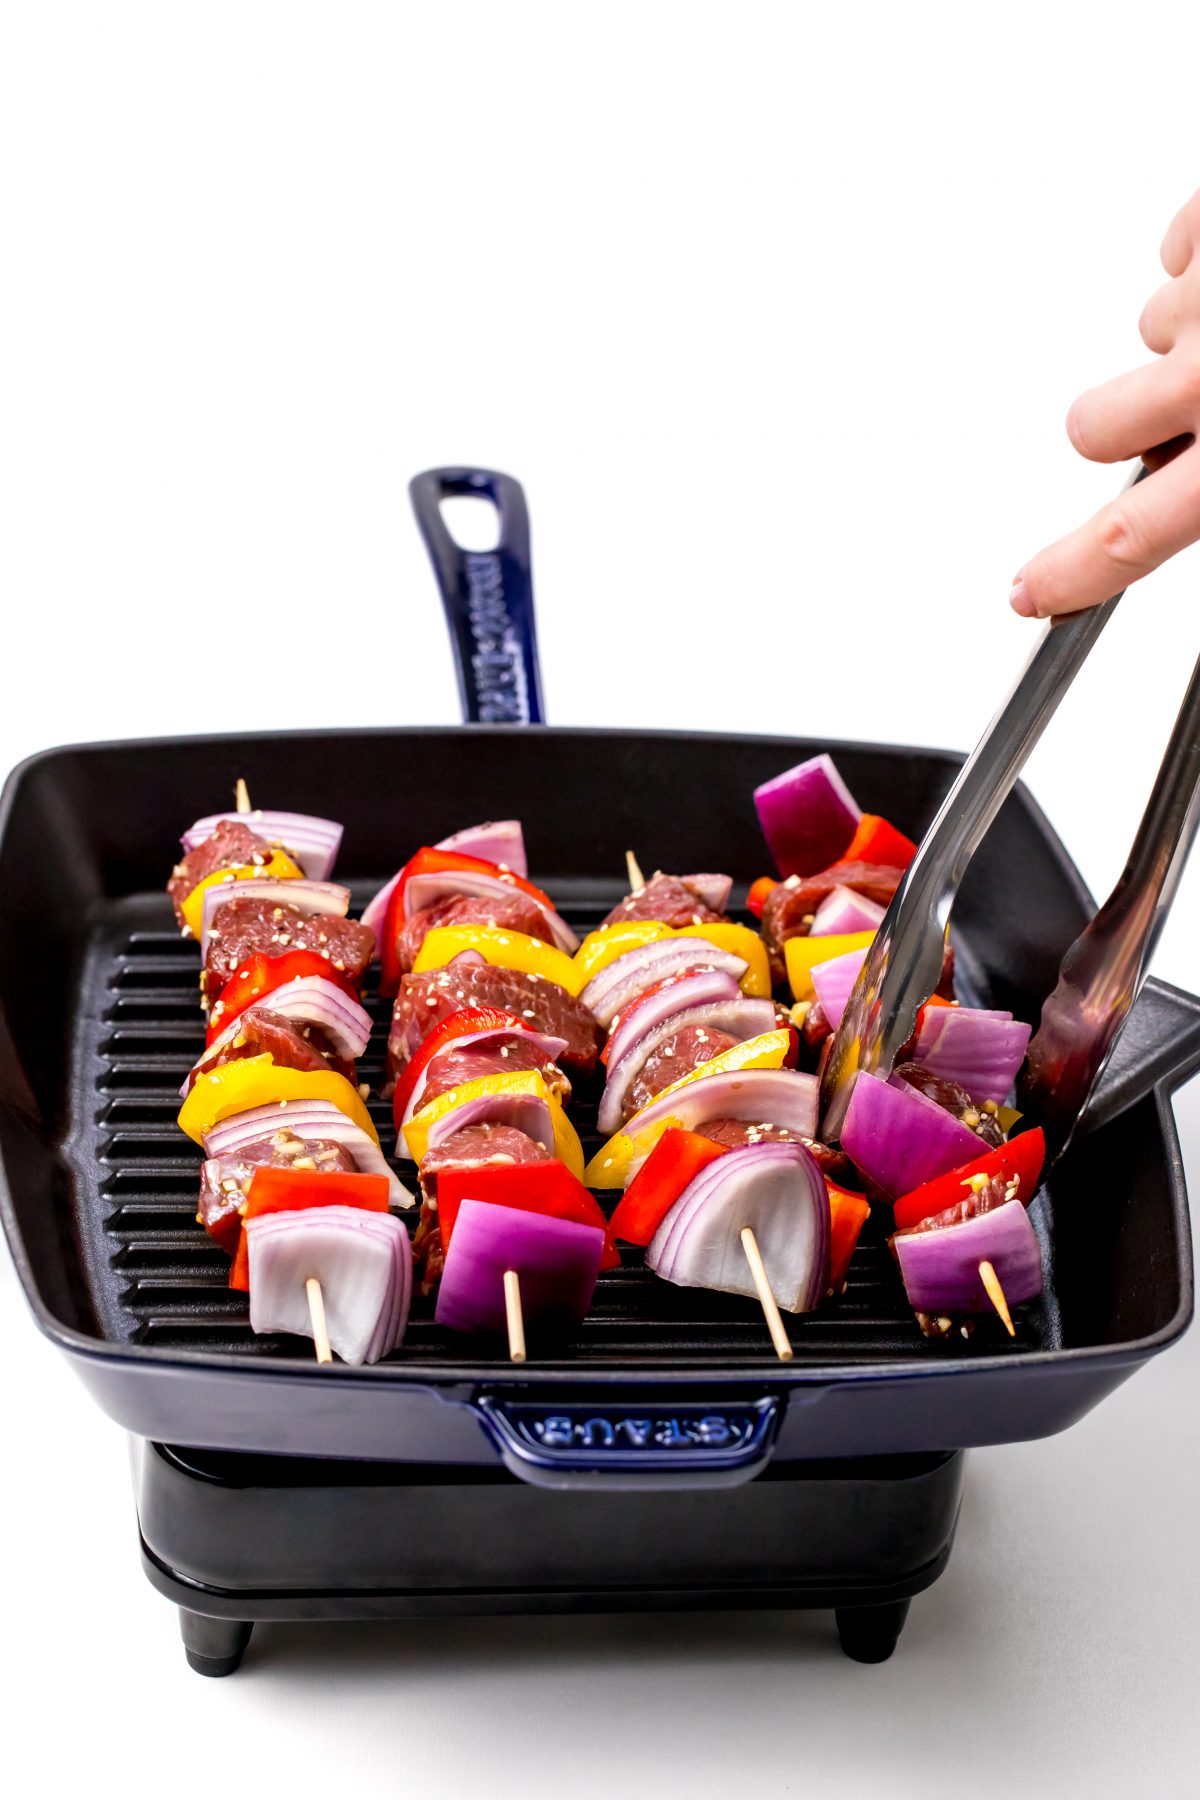 Place Korean steak kabobs on heated grill